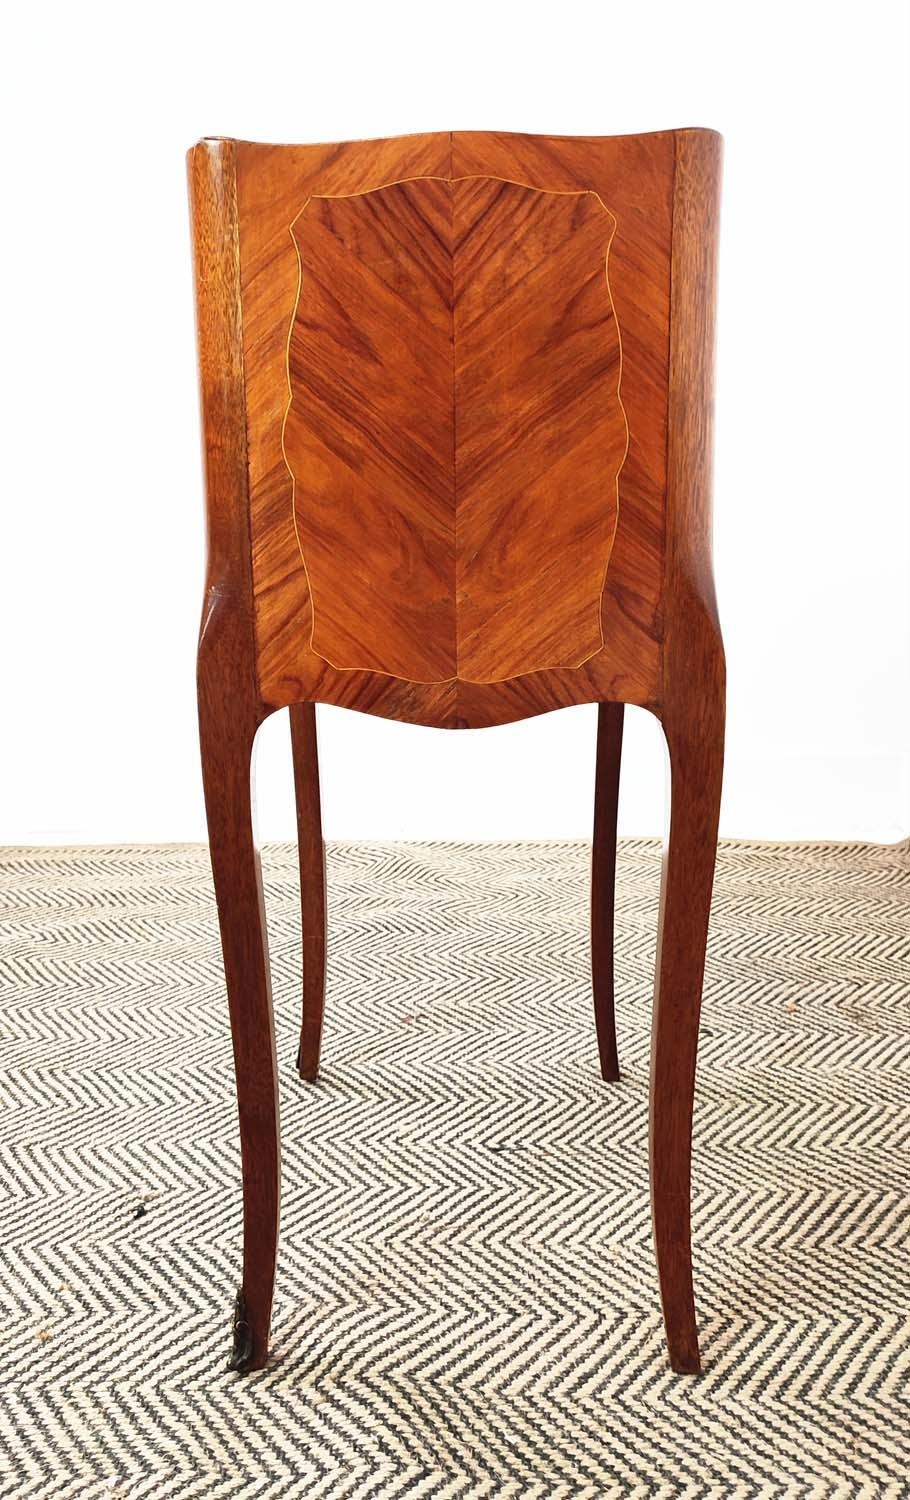 BEDSIDE CABINETS, a matched pair, Louis XV style tulipwood and inlaid, one with marquetry and - Image 9 of 10